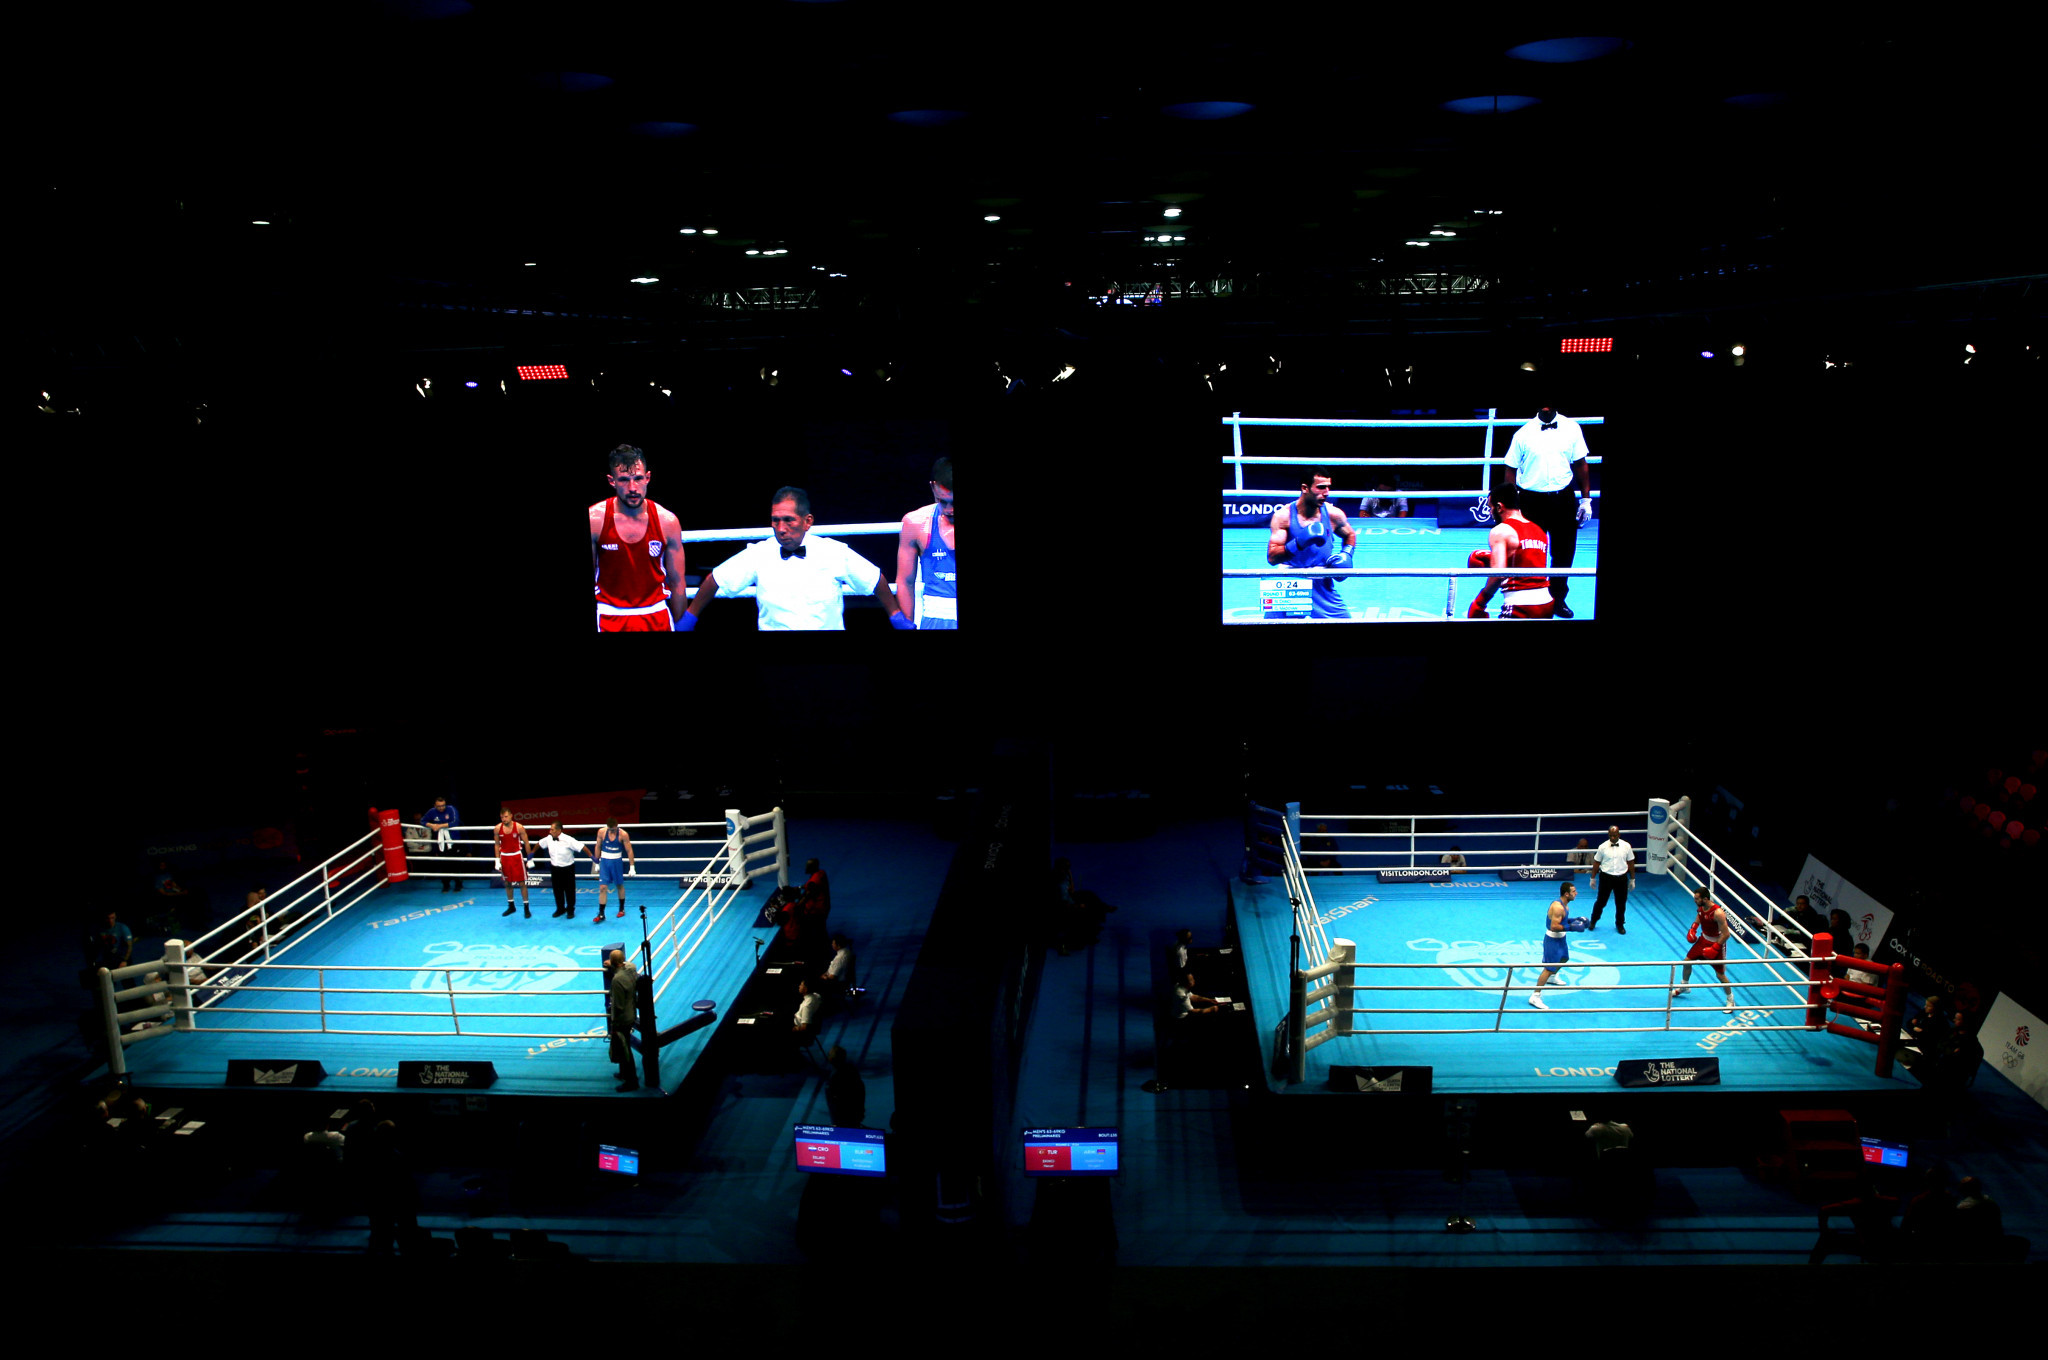 AIBA faces a potential litigation with First Commitment International Trade ©Getty Images